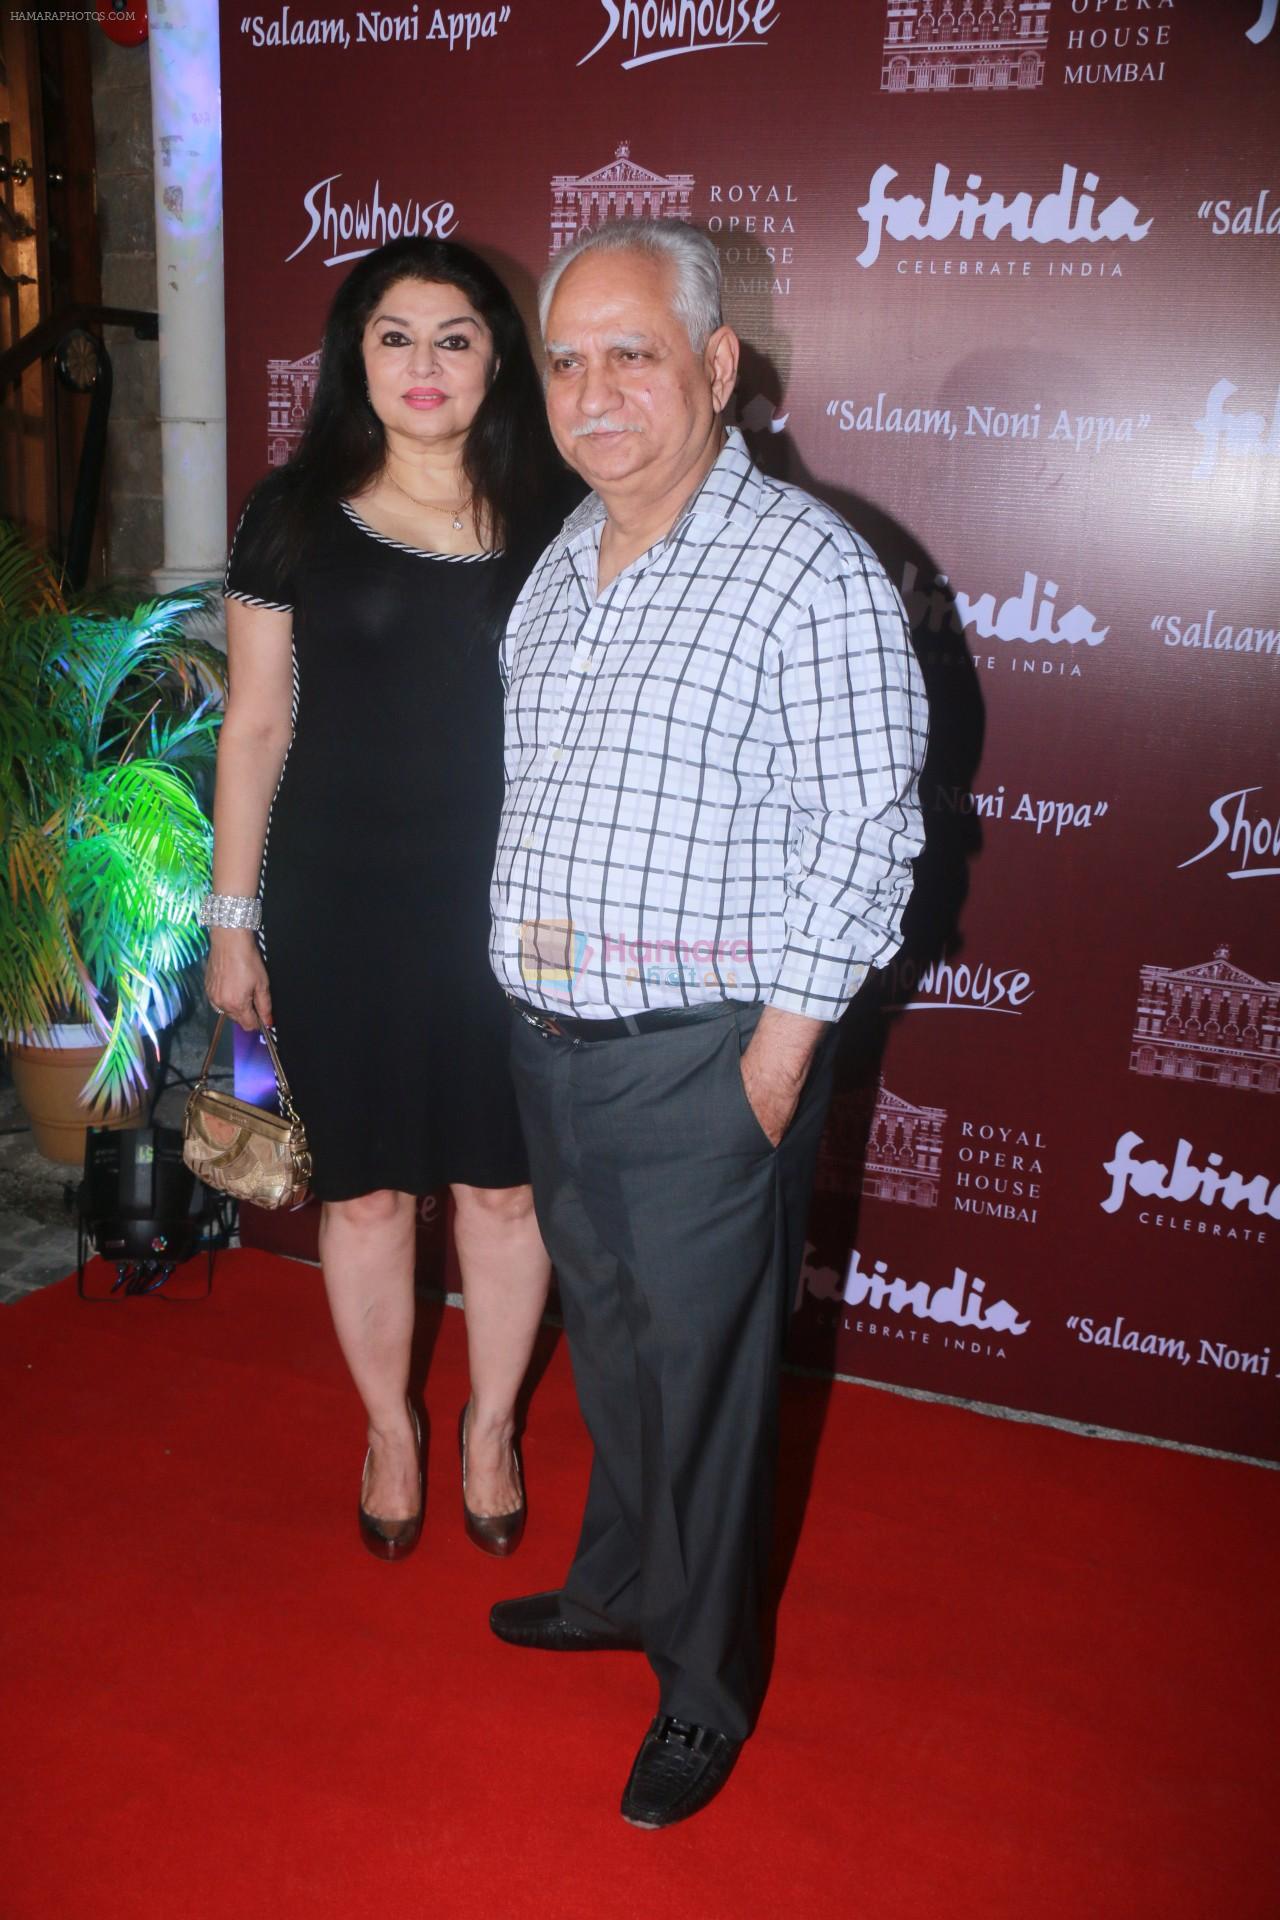 Ramesh Sippy at the Special preview of Salaam Noni Appa based on Twinkle Khanna's novel at Royal Opera House in mumbai on 28th Oct 2017